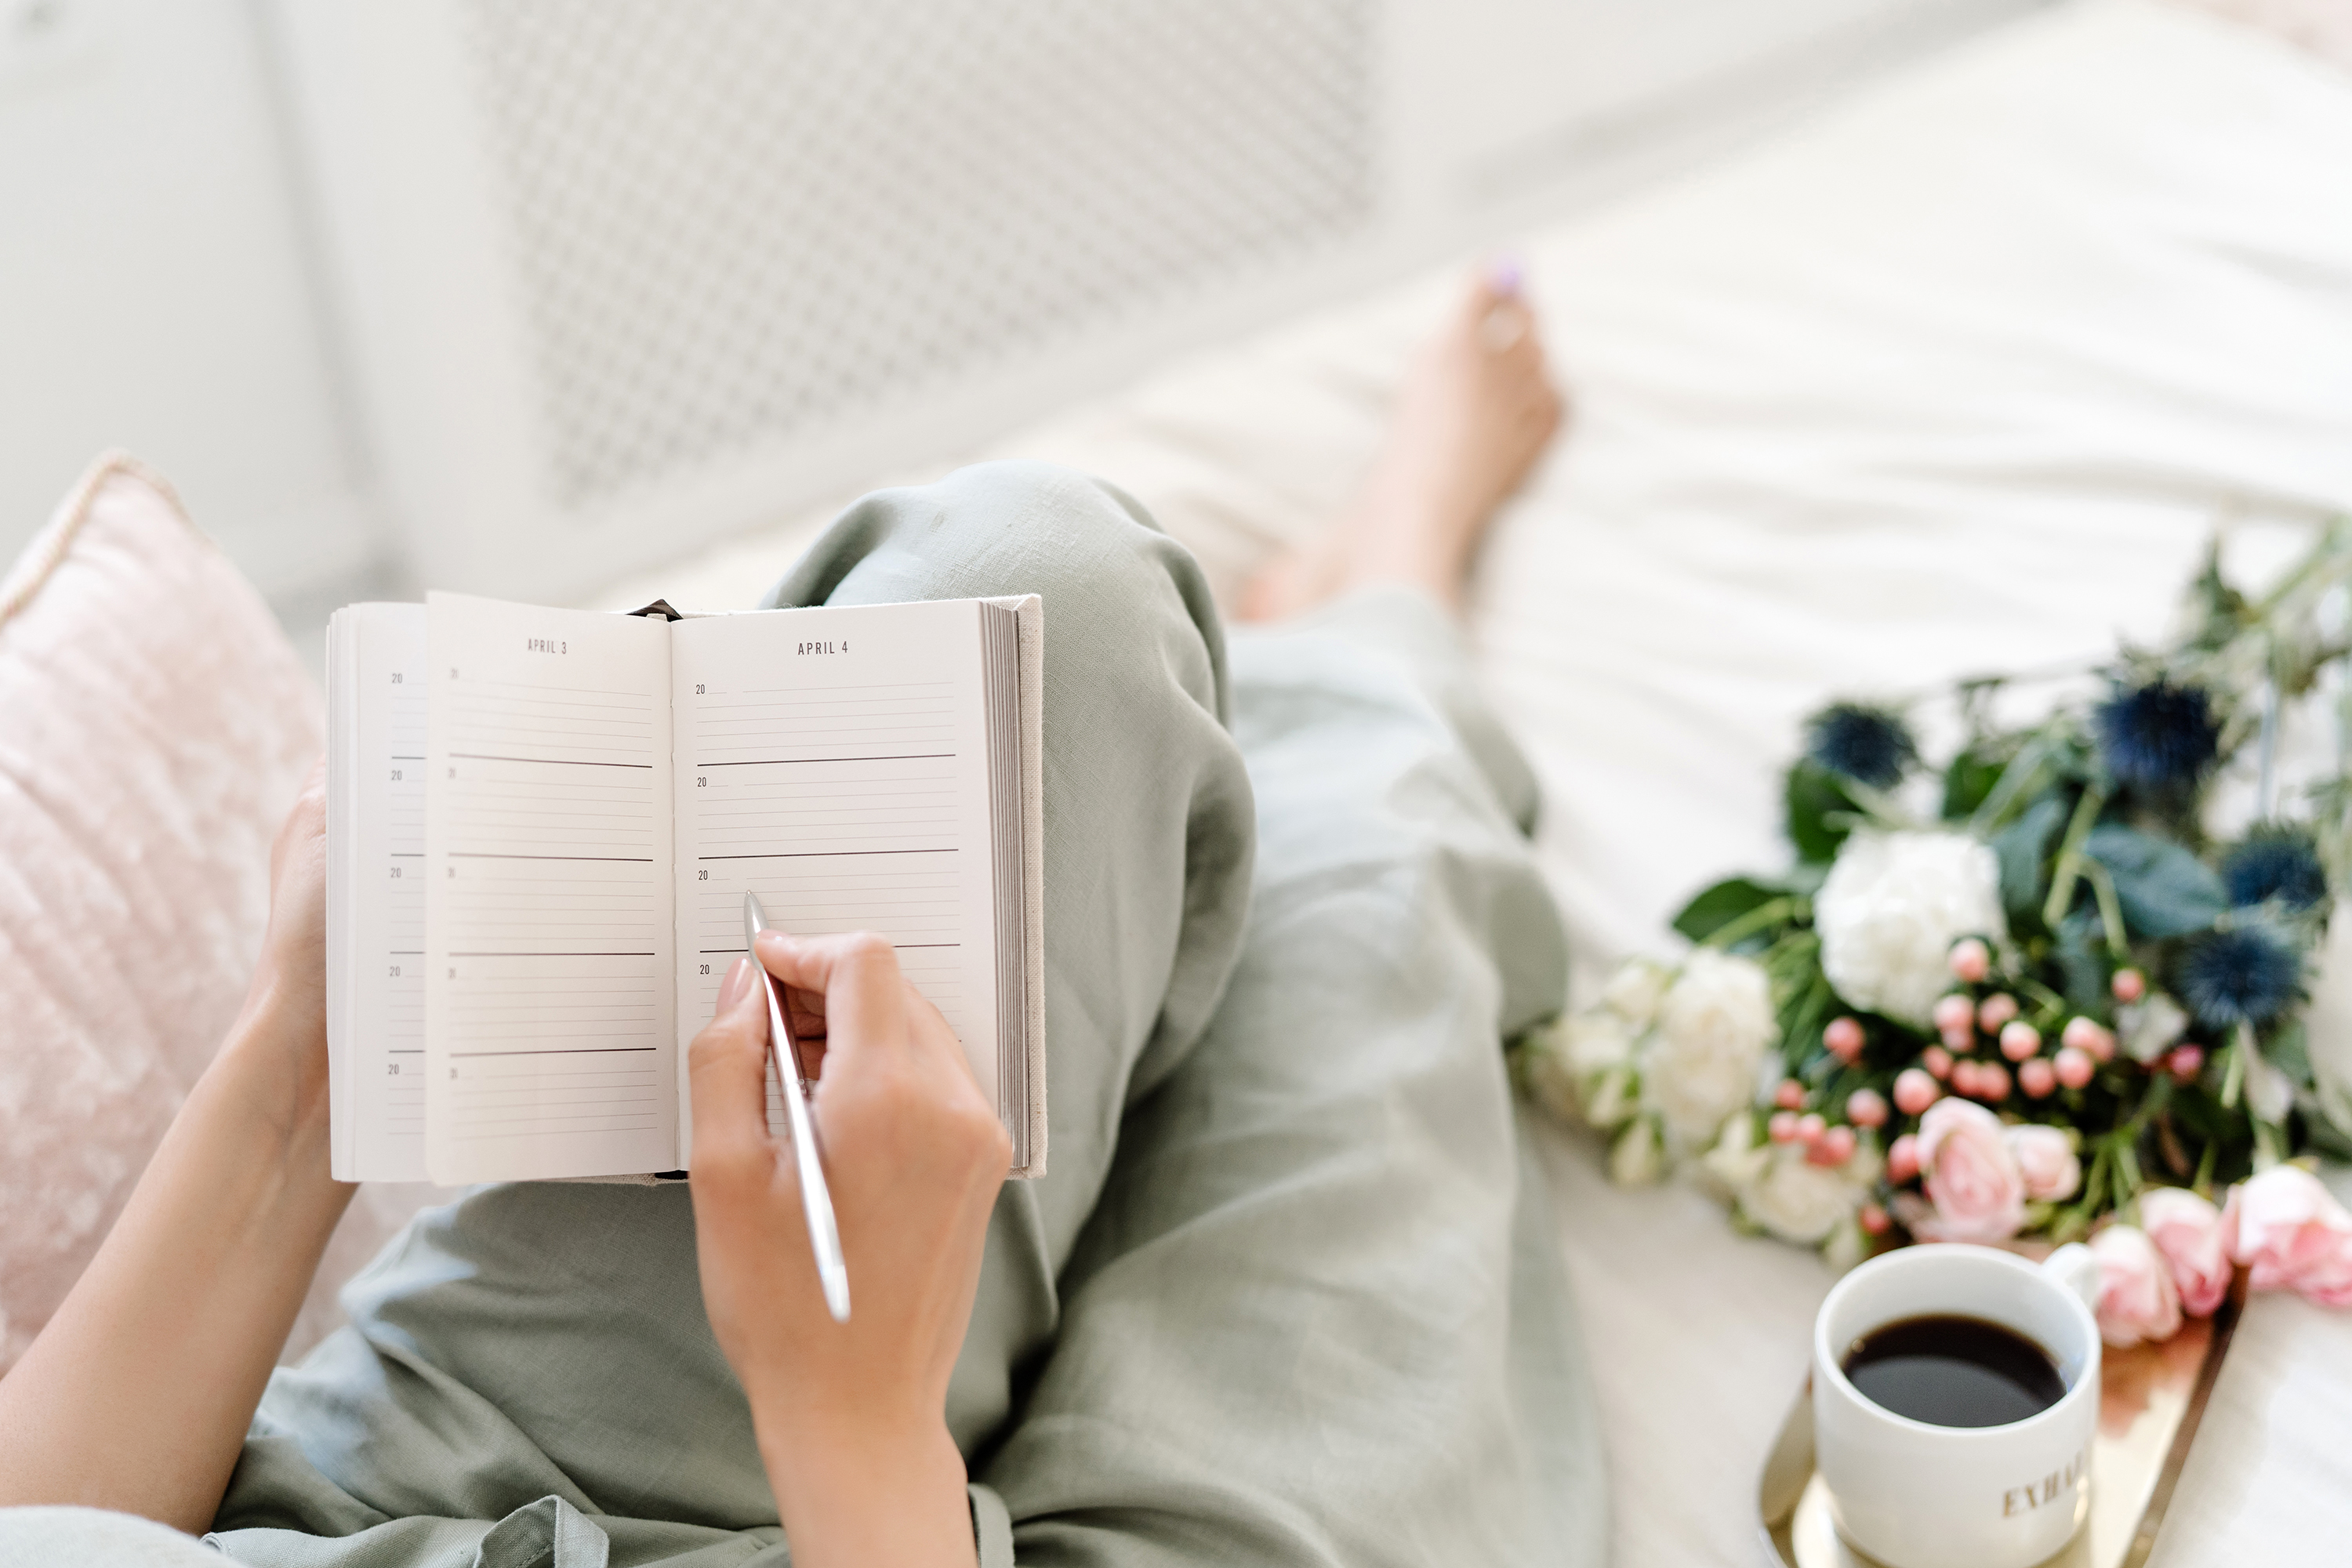 The best morning routine for success should include writing what you are grateful for or clearing your head for the day by journaling 